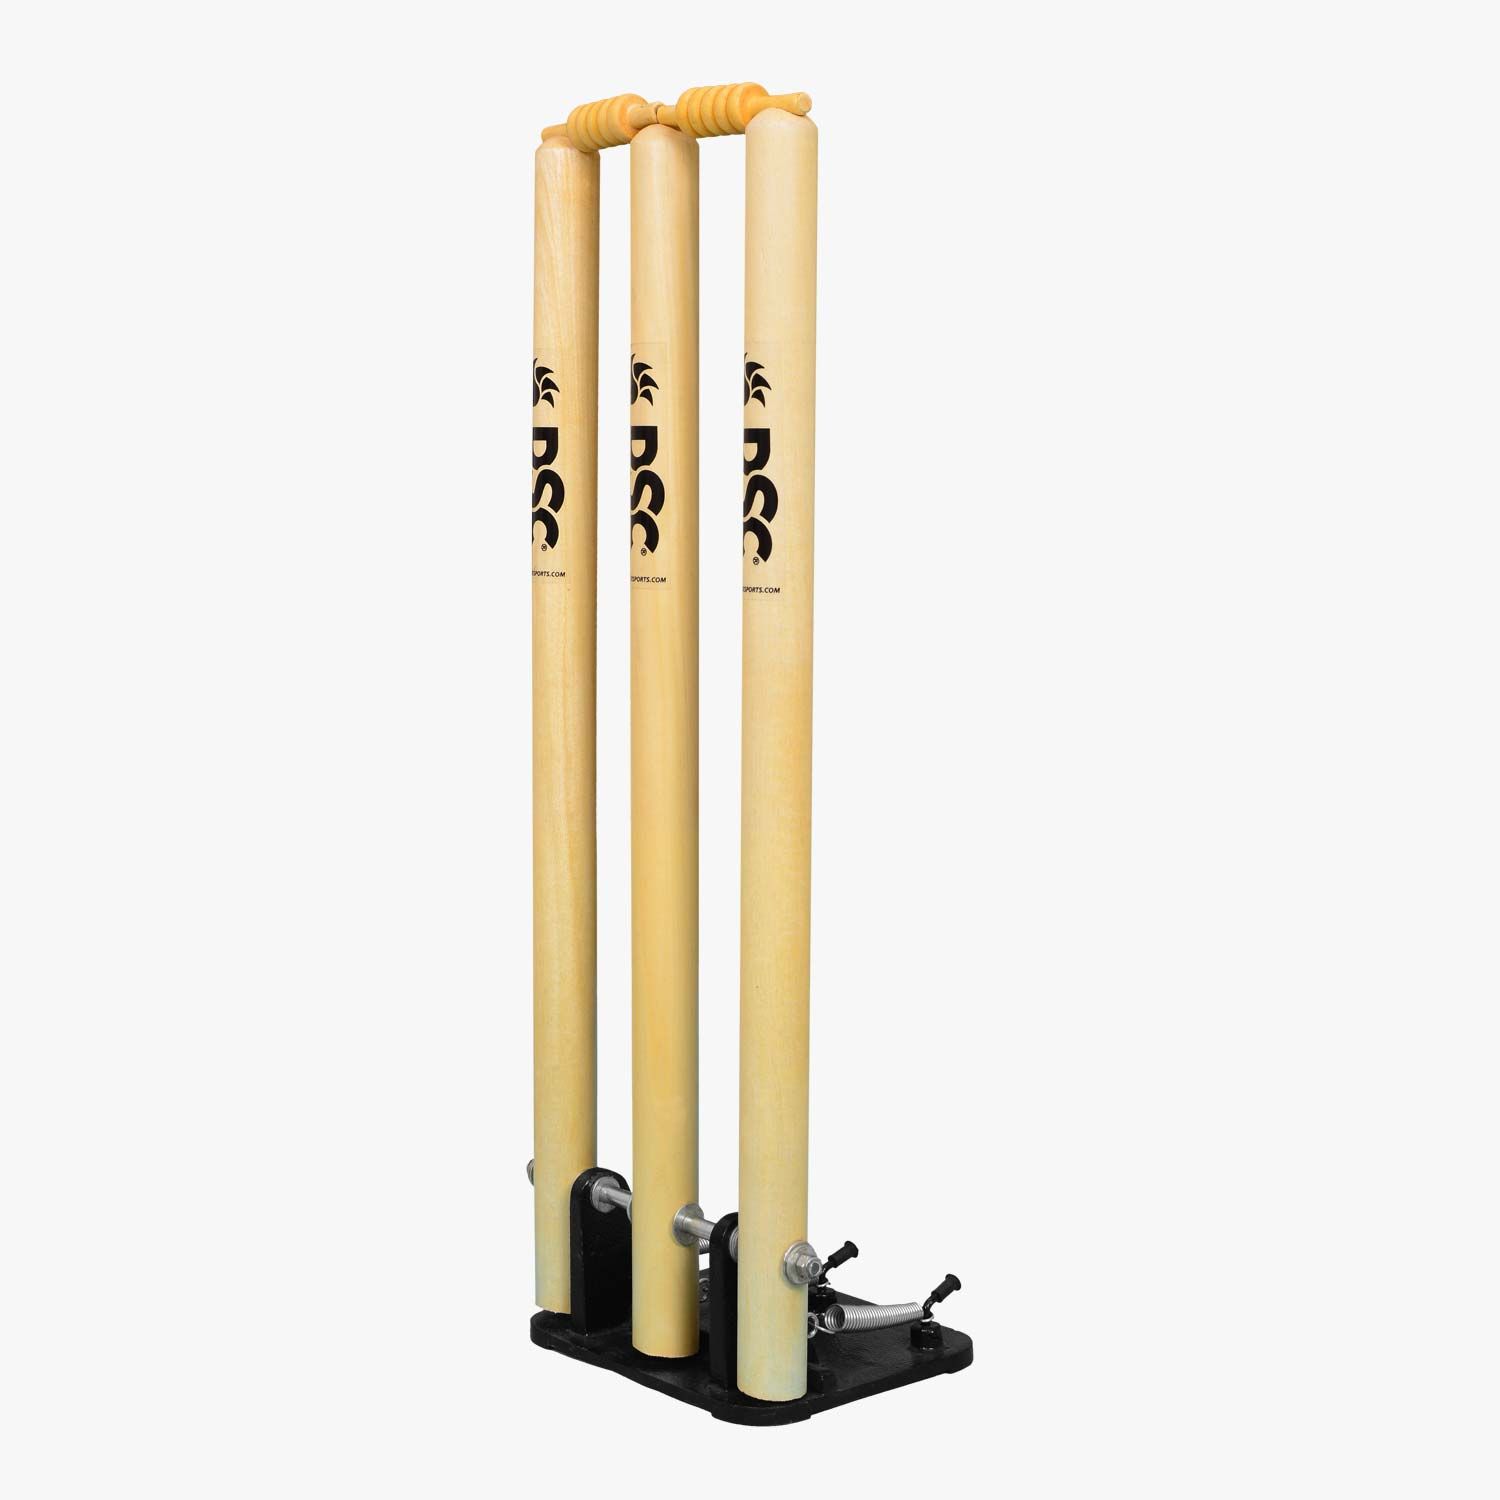 CRICKET ACCESSORIES DSC SPRING STUMP SET OF 3 WITH IRON BASE 